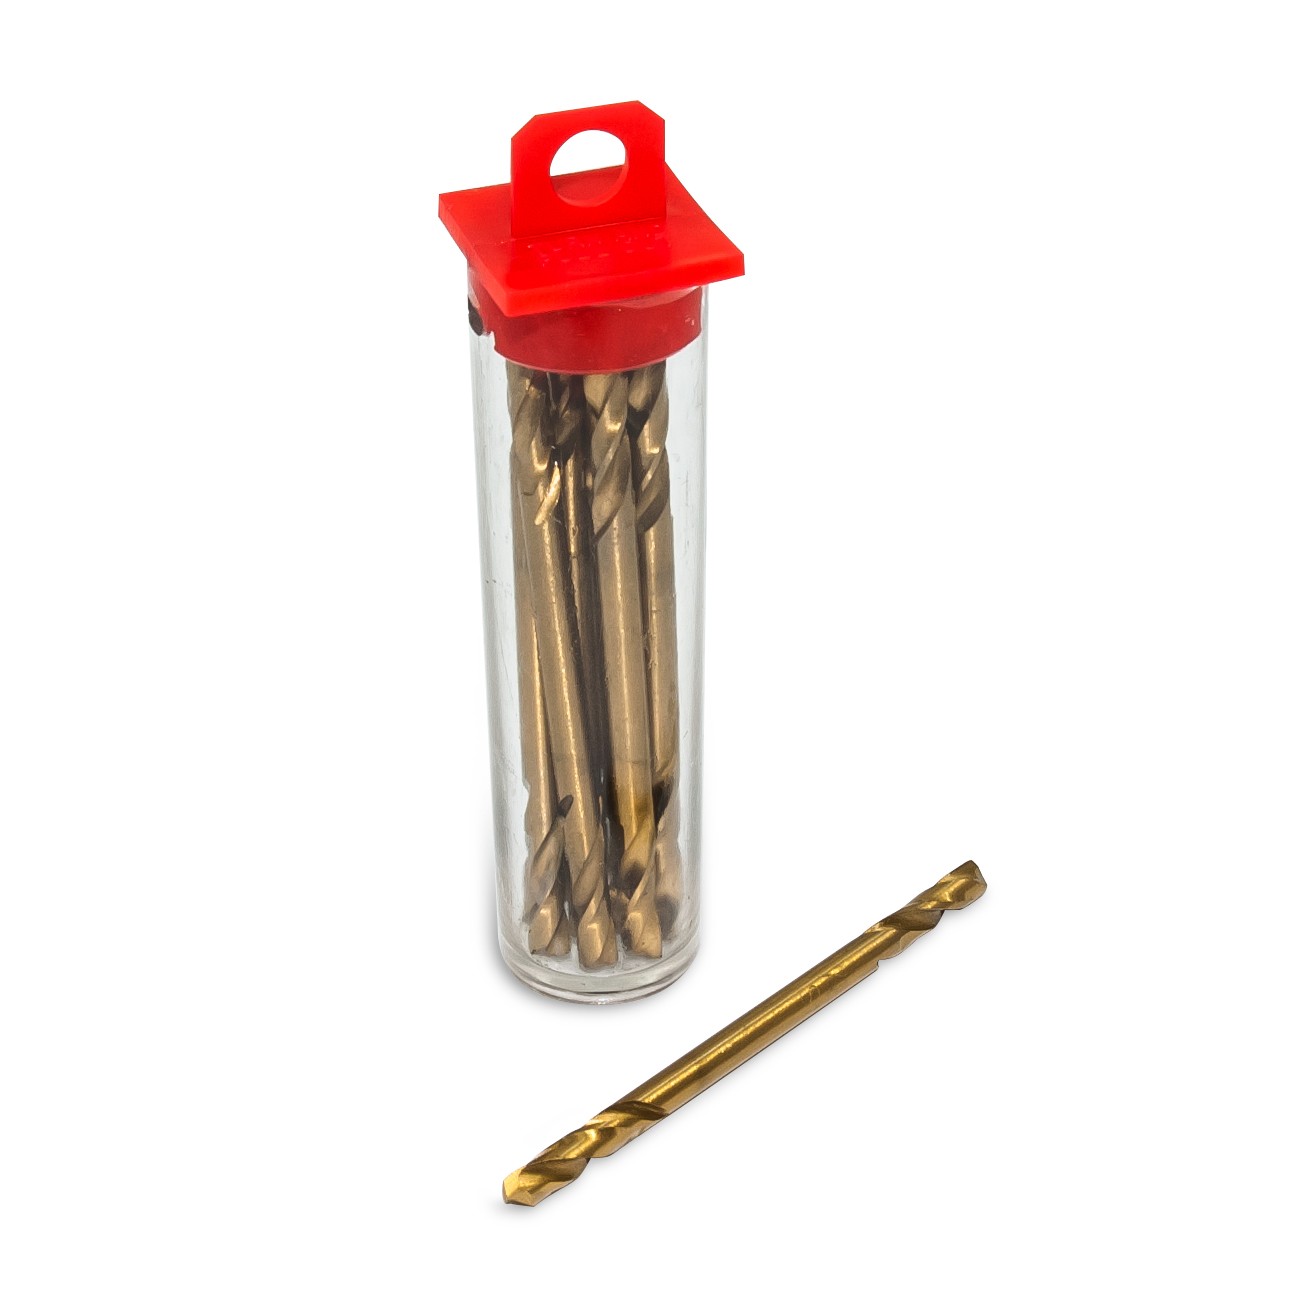 1/8" Double-ended High Speed Steel Titanium Coated Stubby Drill Bits, 12 Bits per Tube, 12 tubes per Box